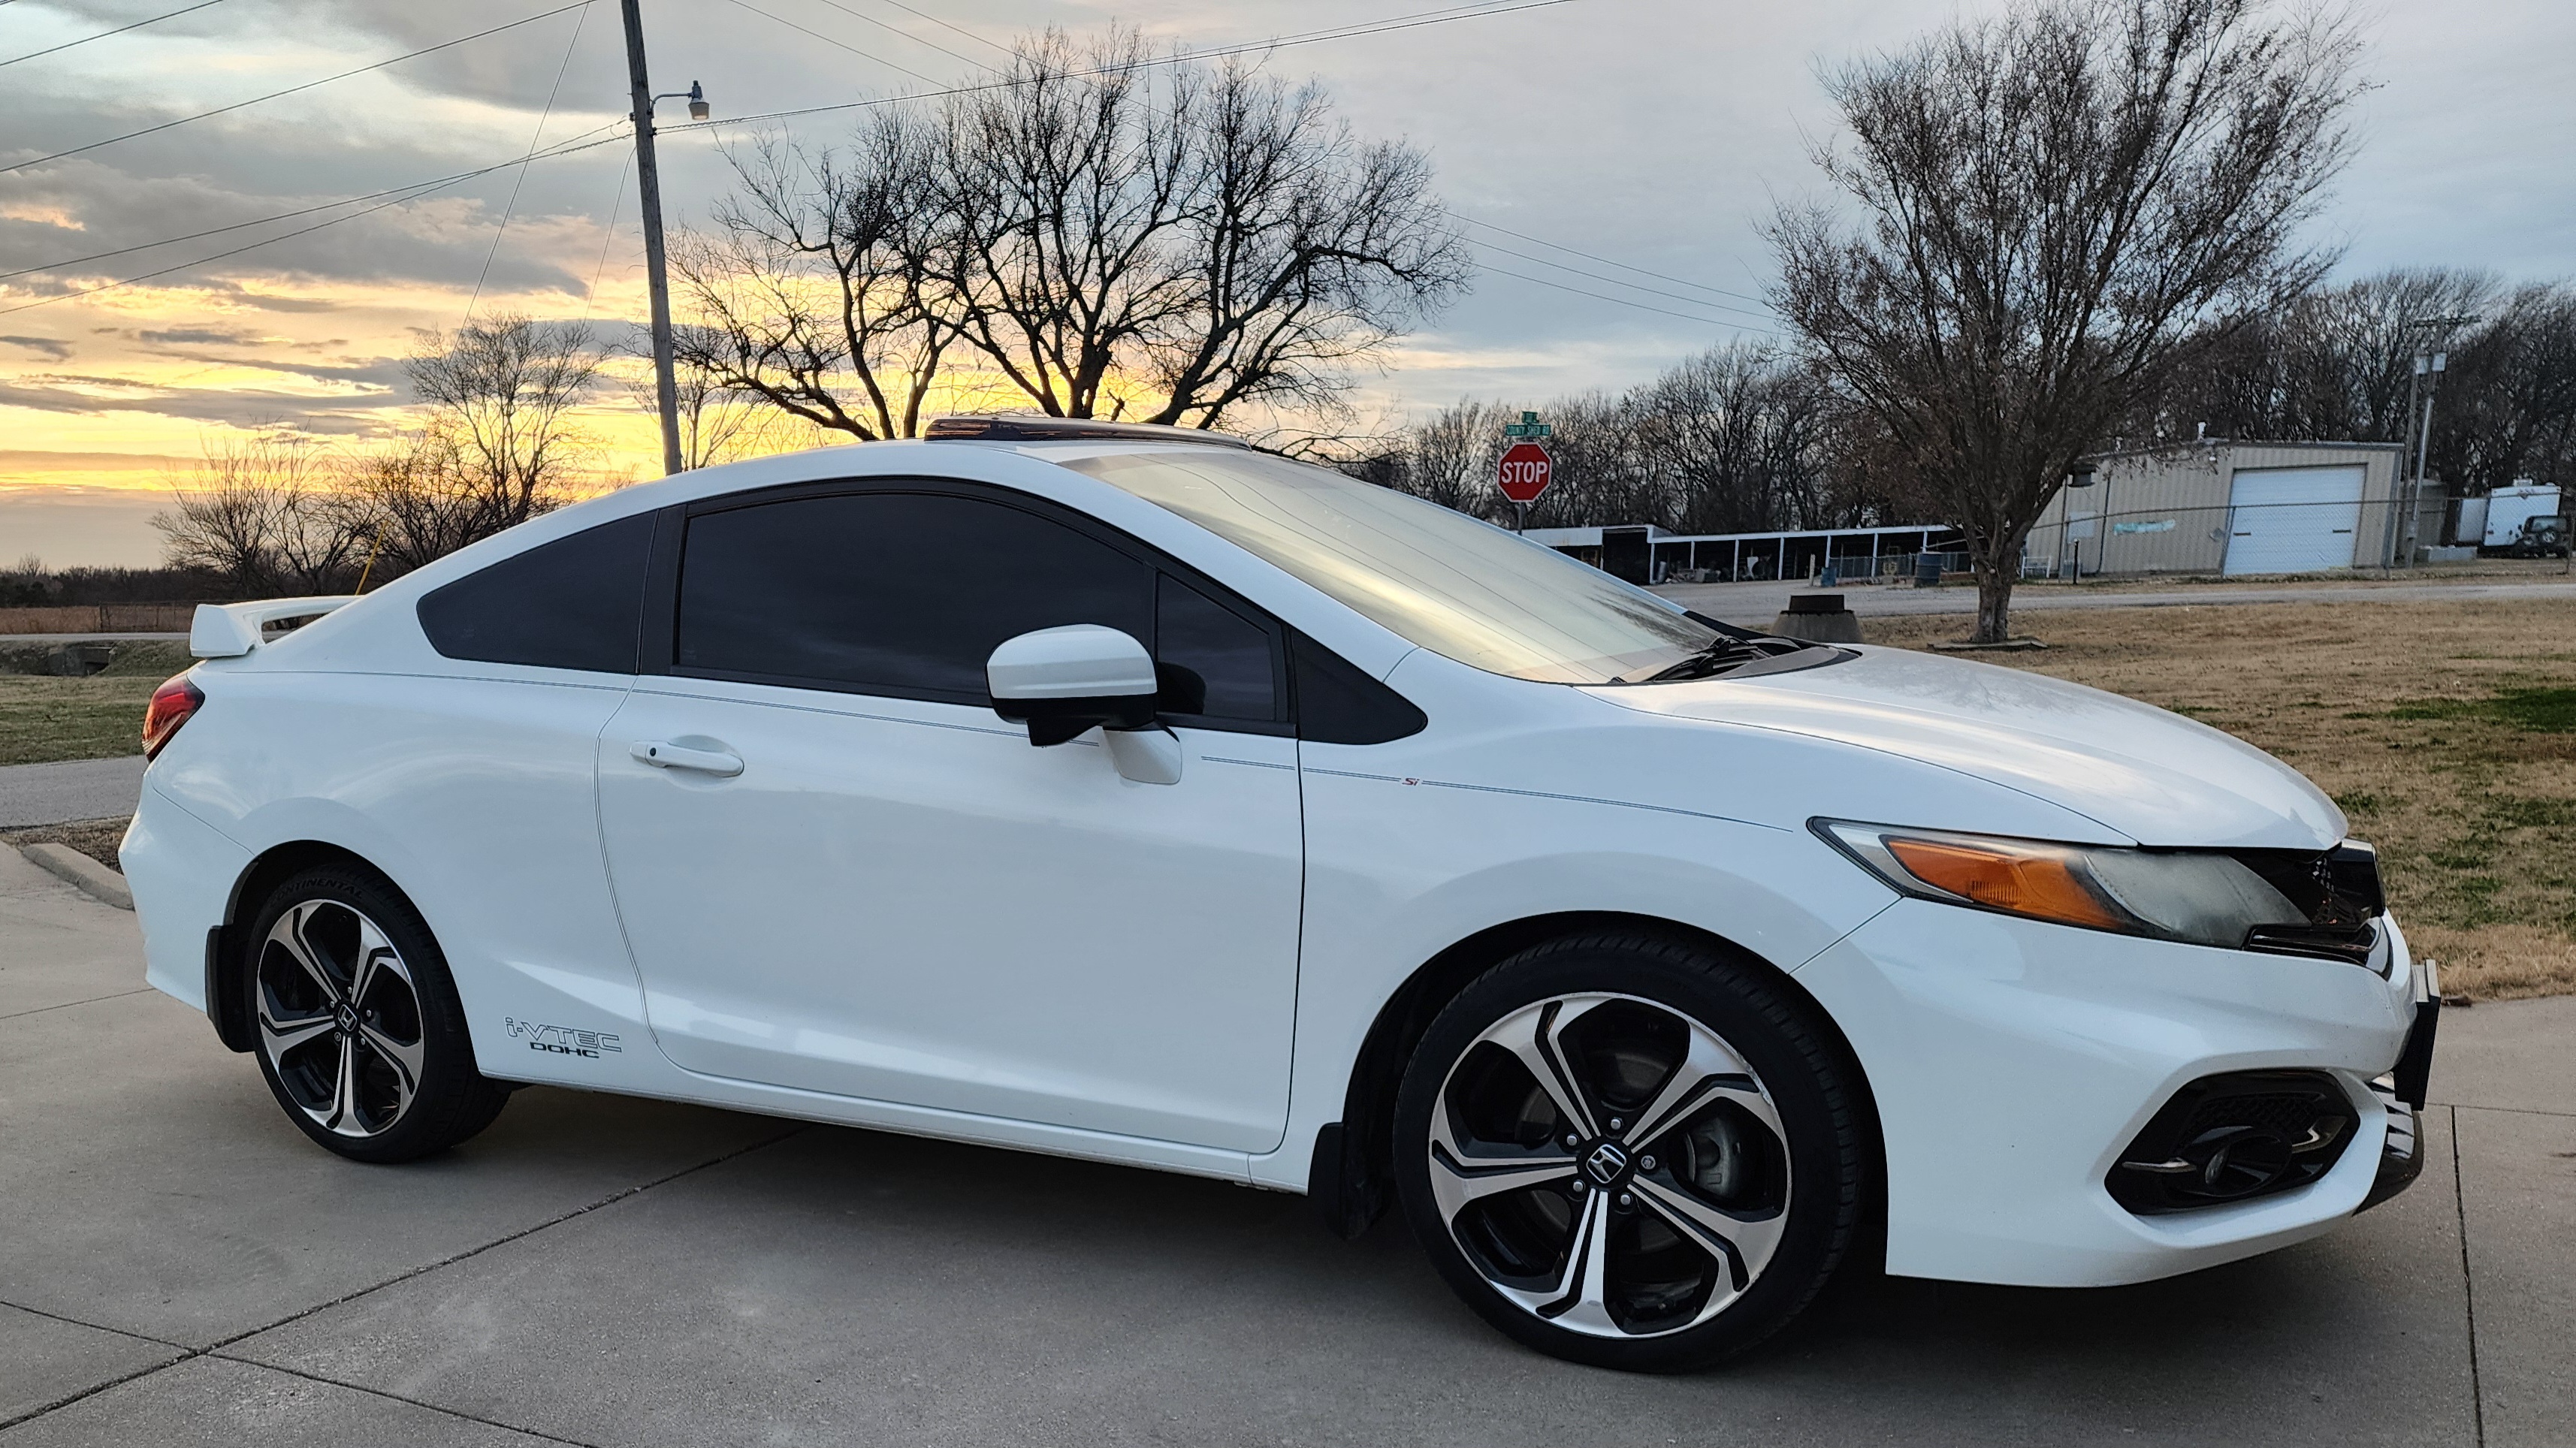 Buying a Used Honda Civic: Everything You Need to Know - Autotrader